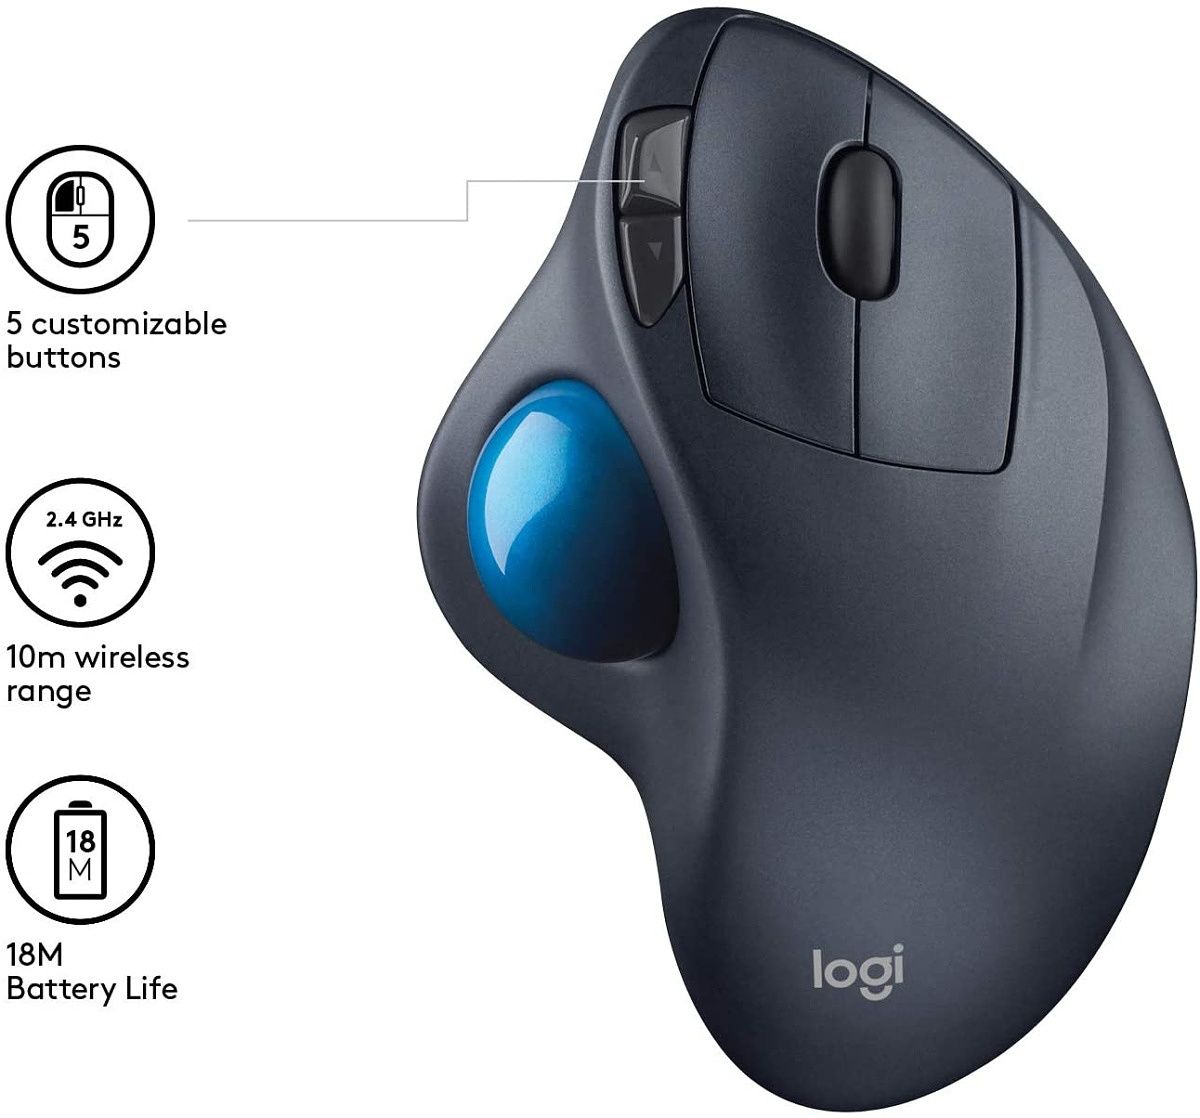 Logitech's M570 has a distinct and instantly recognizable form-factor. The giant teal trackball is easily spotted while the mouse is in use. If you do a lot of scrolling for work, and find a trackball comfortable, this is the best option by far. This is one of the most comfortable mice to use for long periods of time.